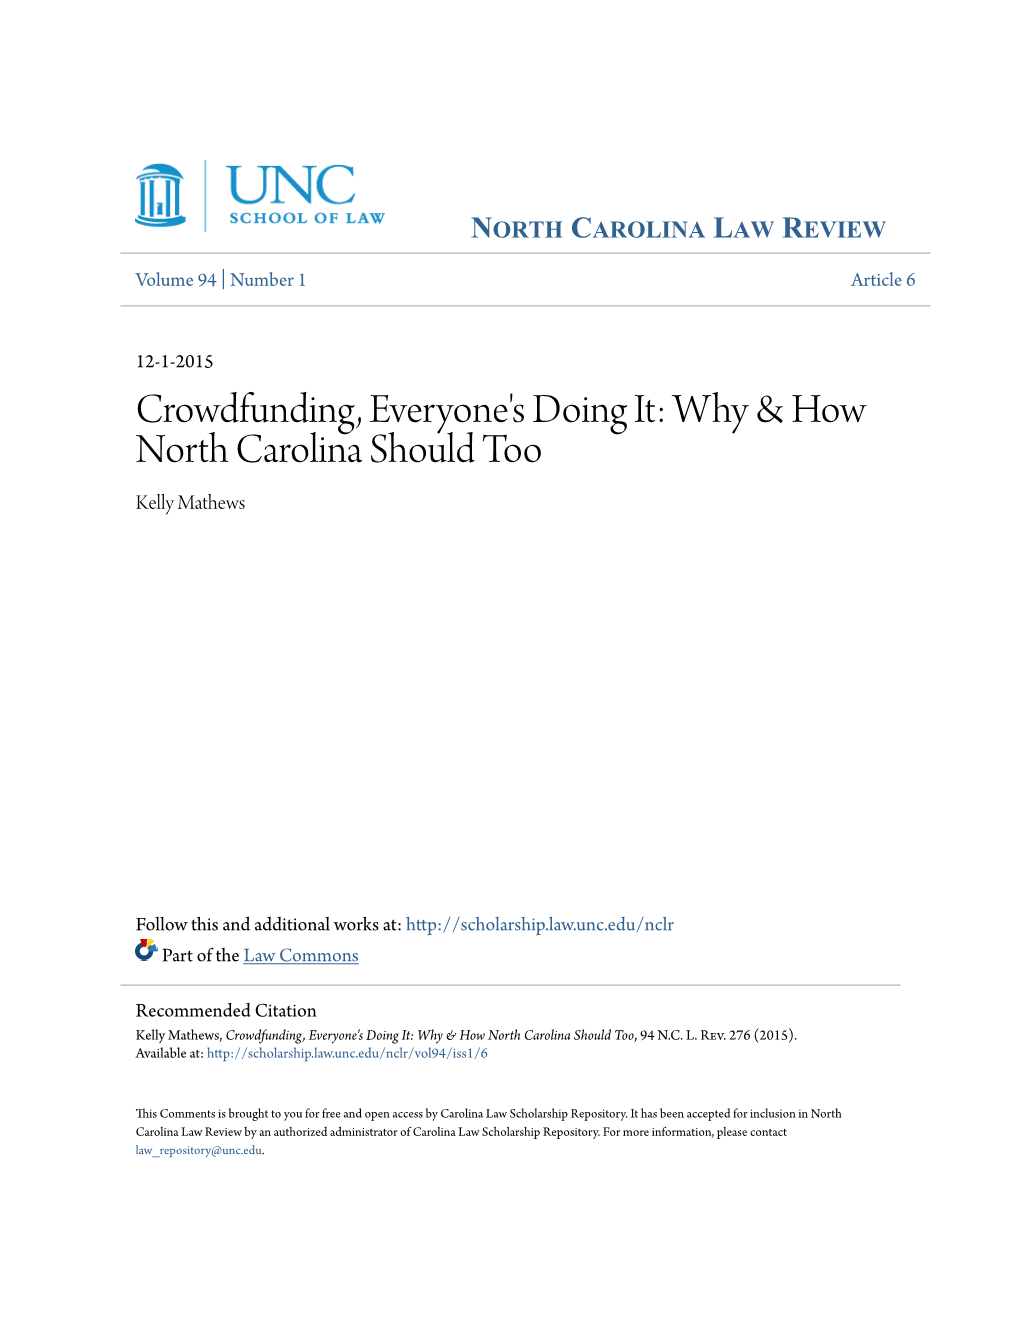 Crowdfunding, Everyone's Doing It: Why & How North Carolina Should Too Kelly Mathews